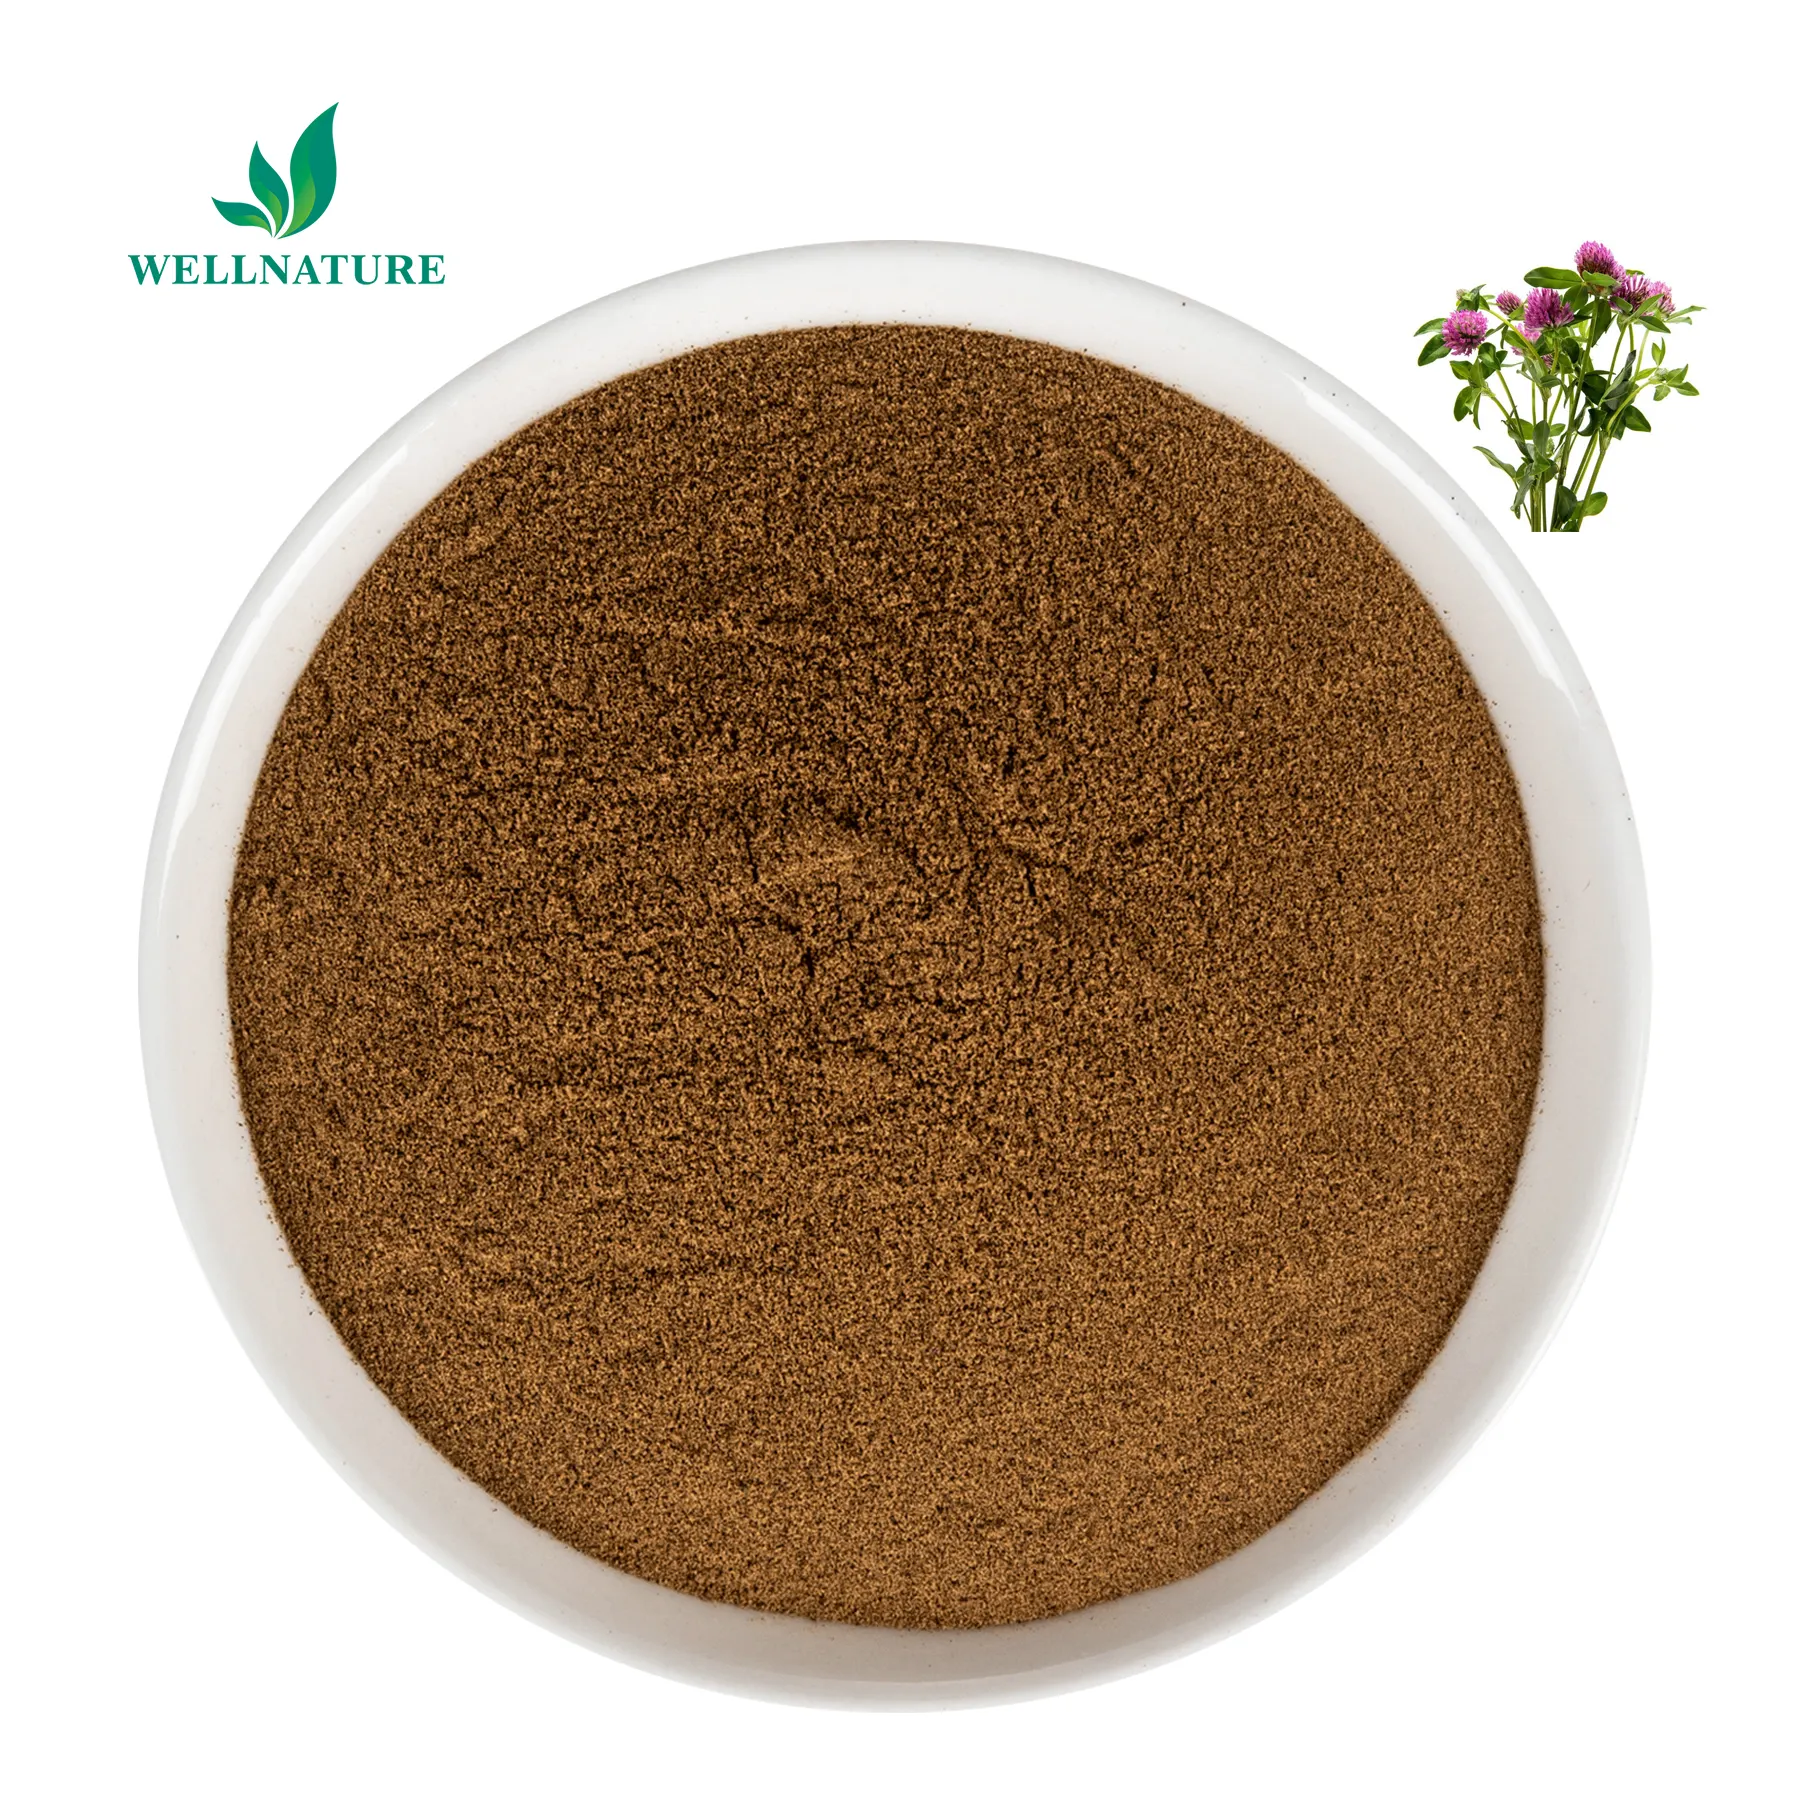 Red Clover Extract 40% Isoflavones Red Clover Extract Powder Quality Red Clover Extract Powder 8% Isoflavones Factory Sale